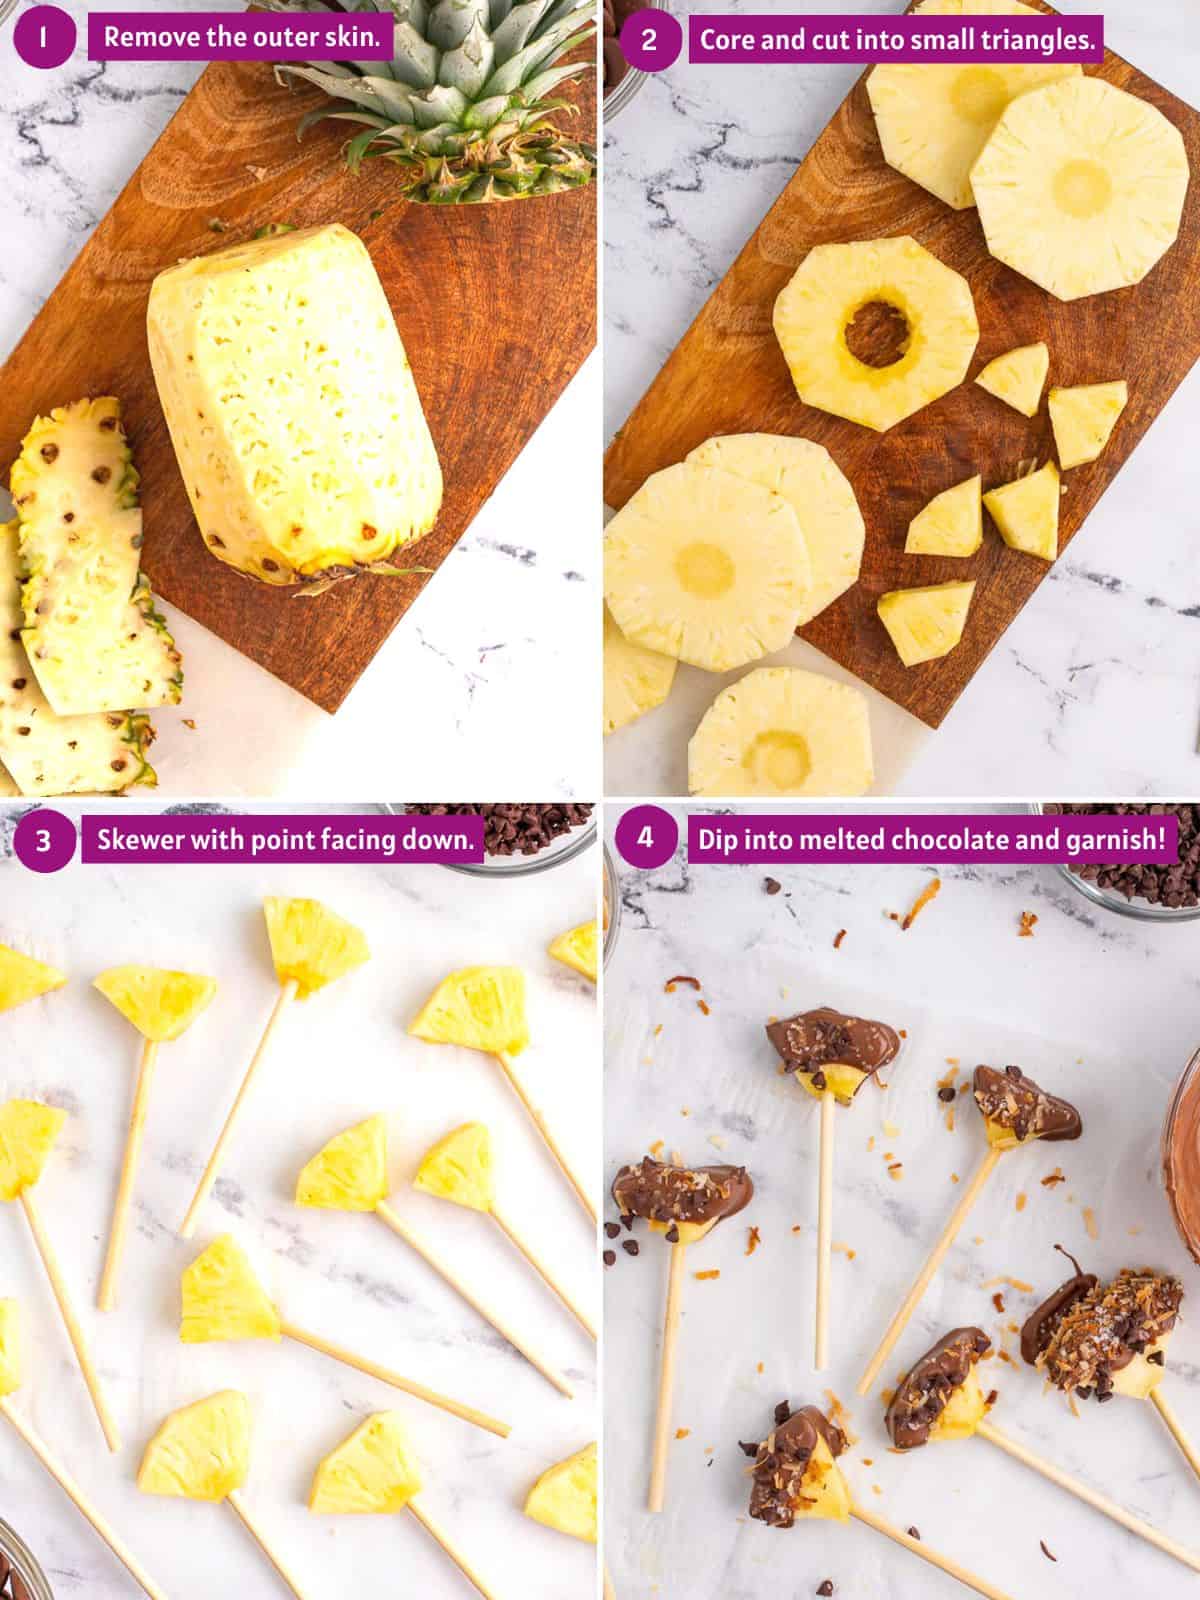 Steps showing how to cut pineapple, skewer and dip melted chocolate.